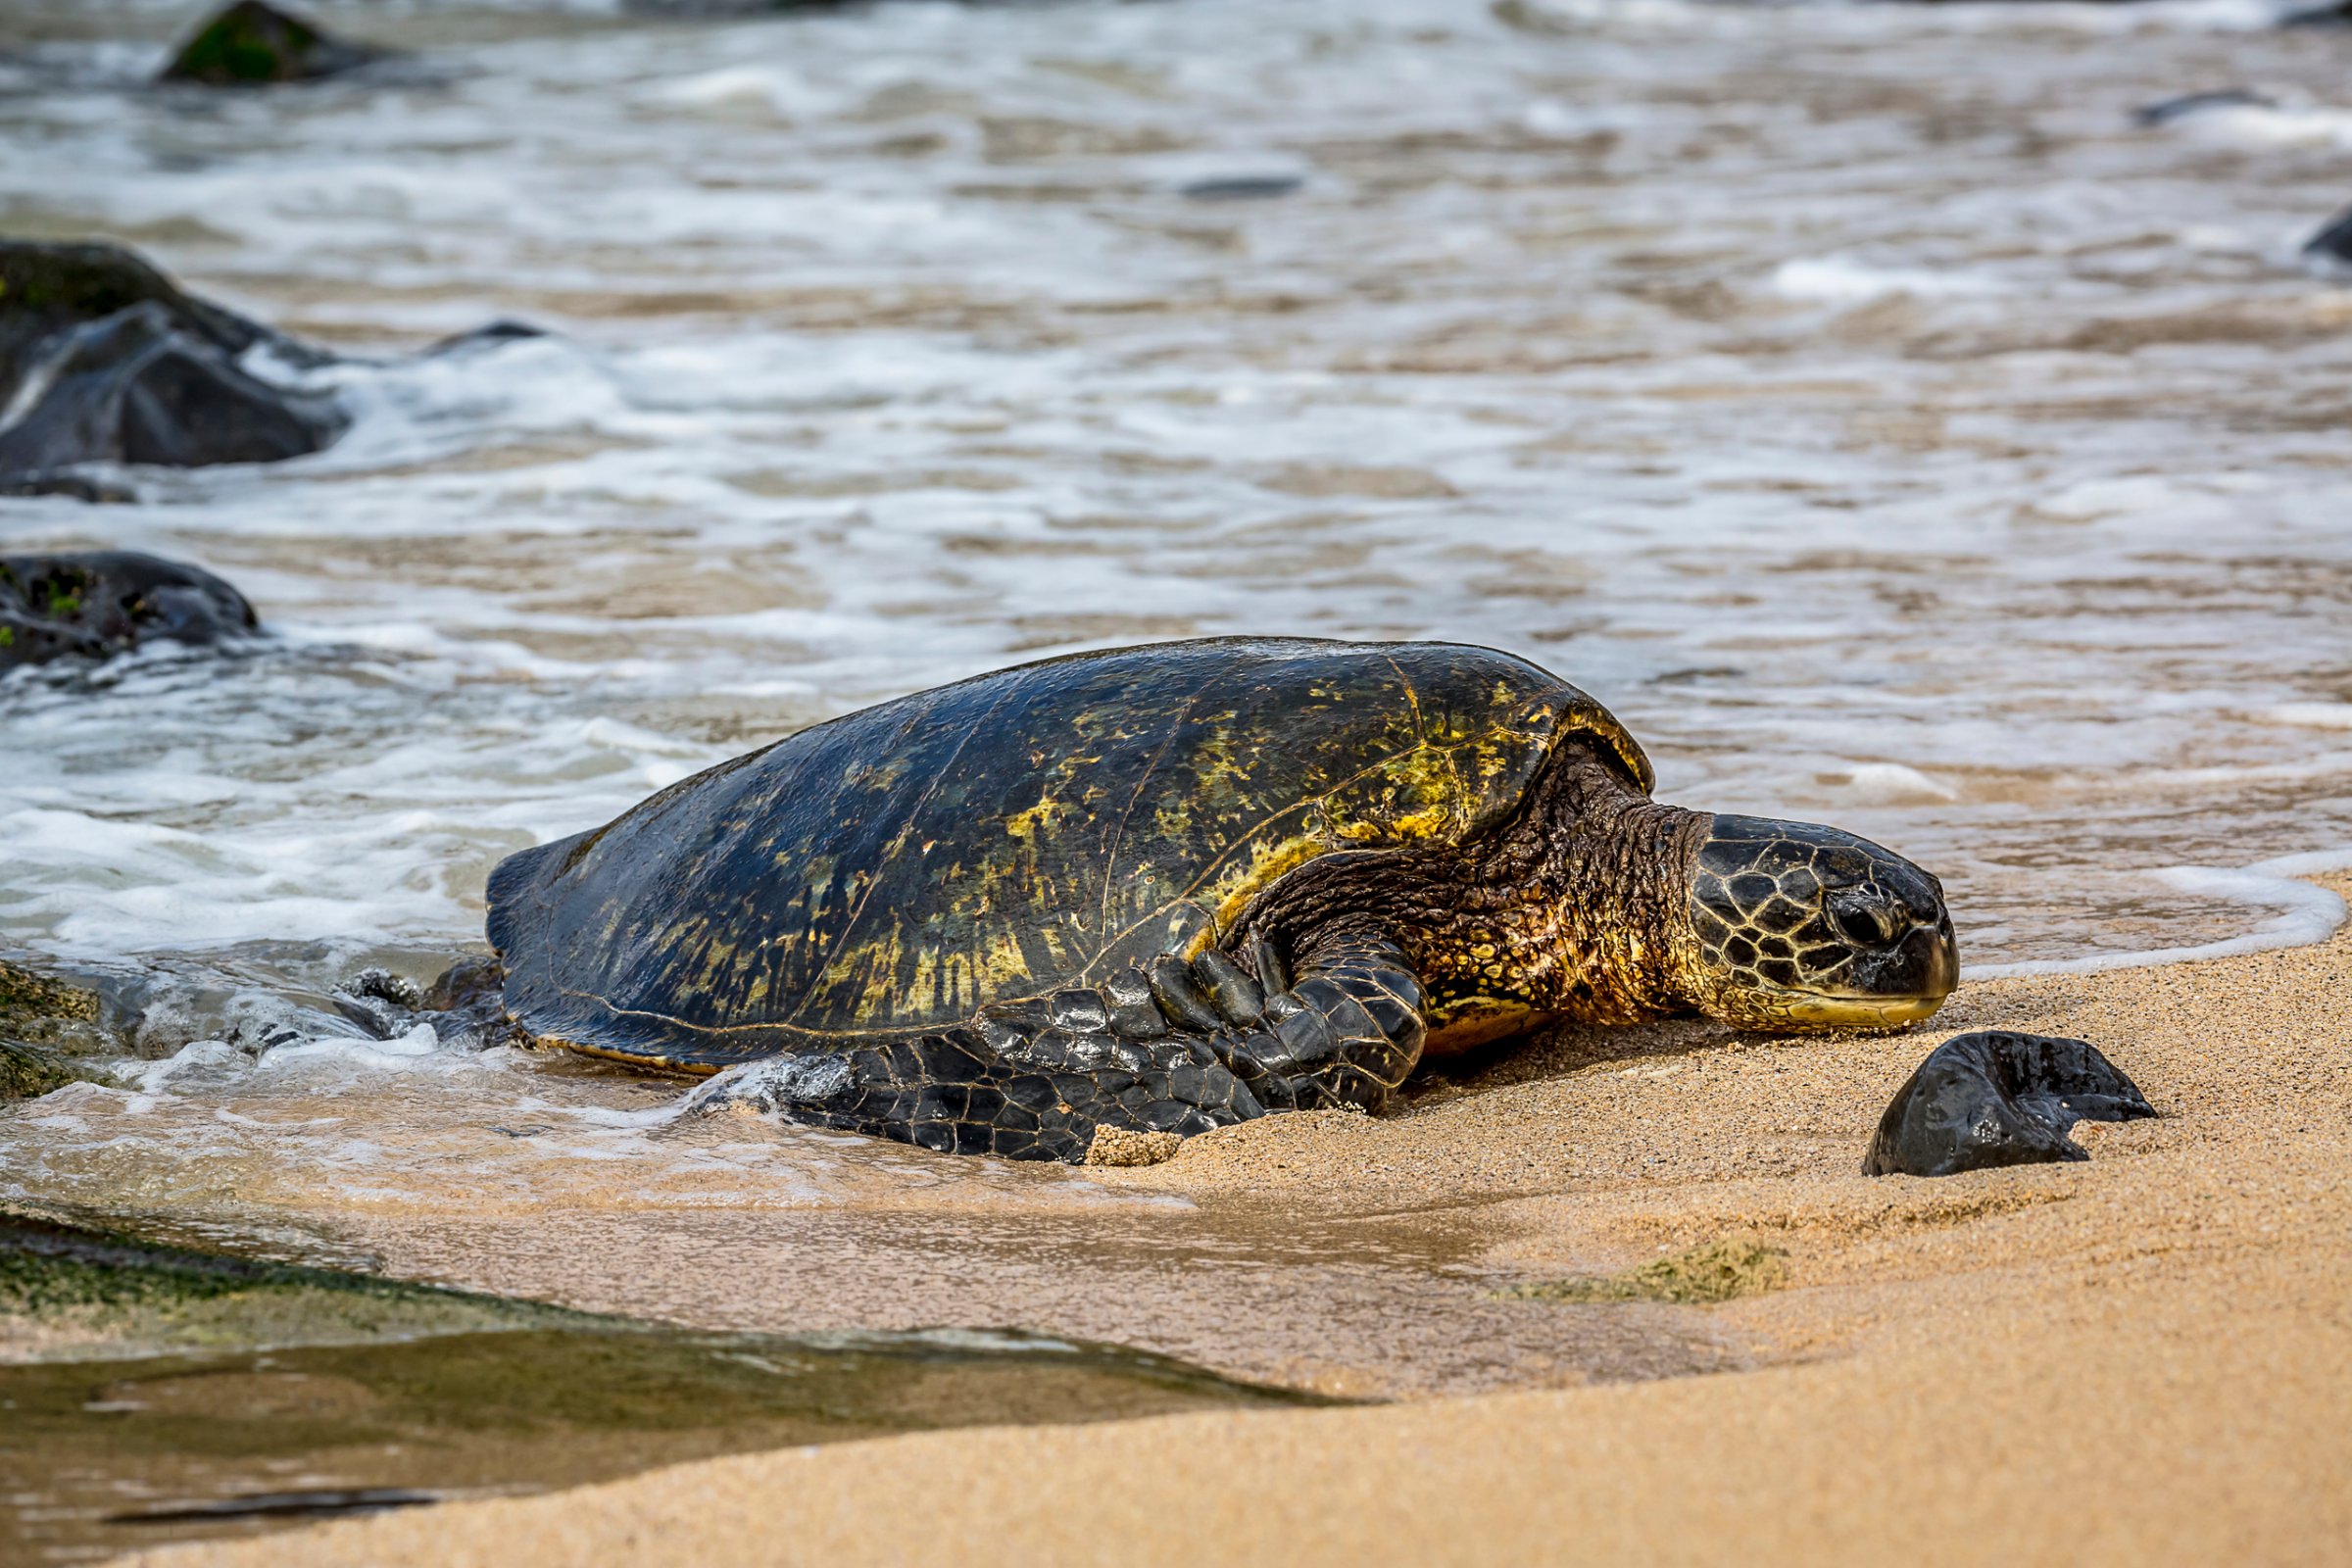 Green sea turtle (Chelonia mydas), an endangered species, makes its way from the Pacific ocean onto the beach